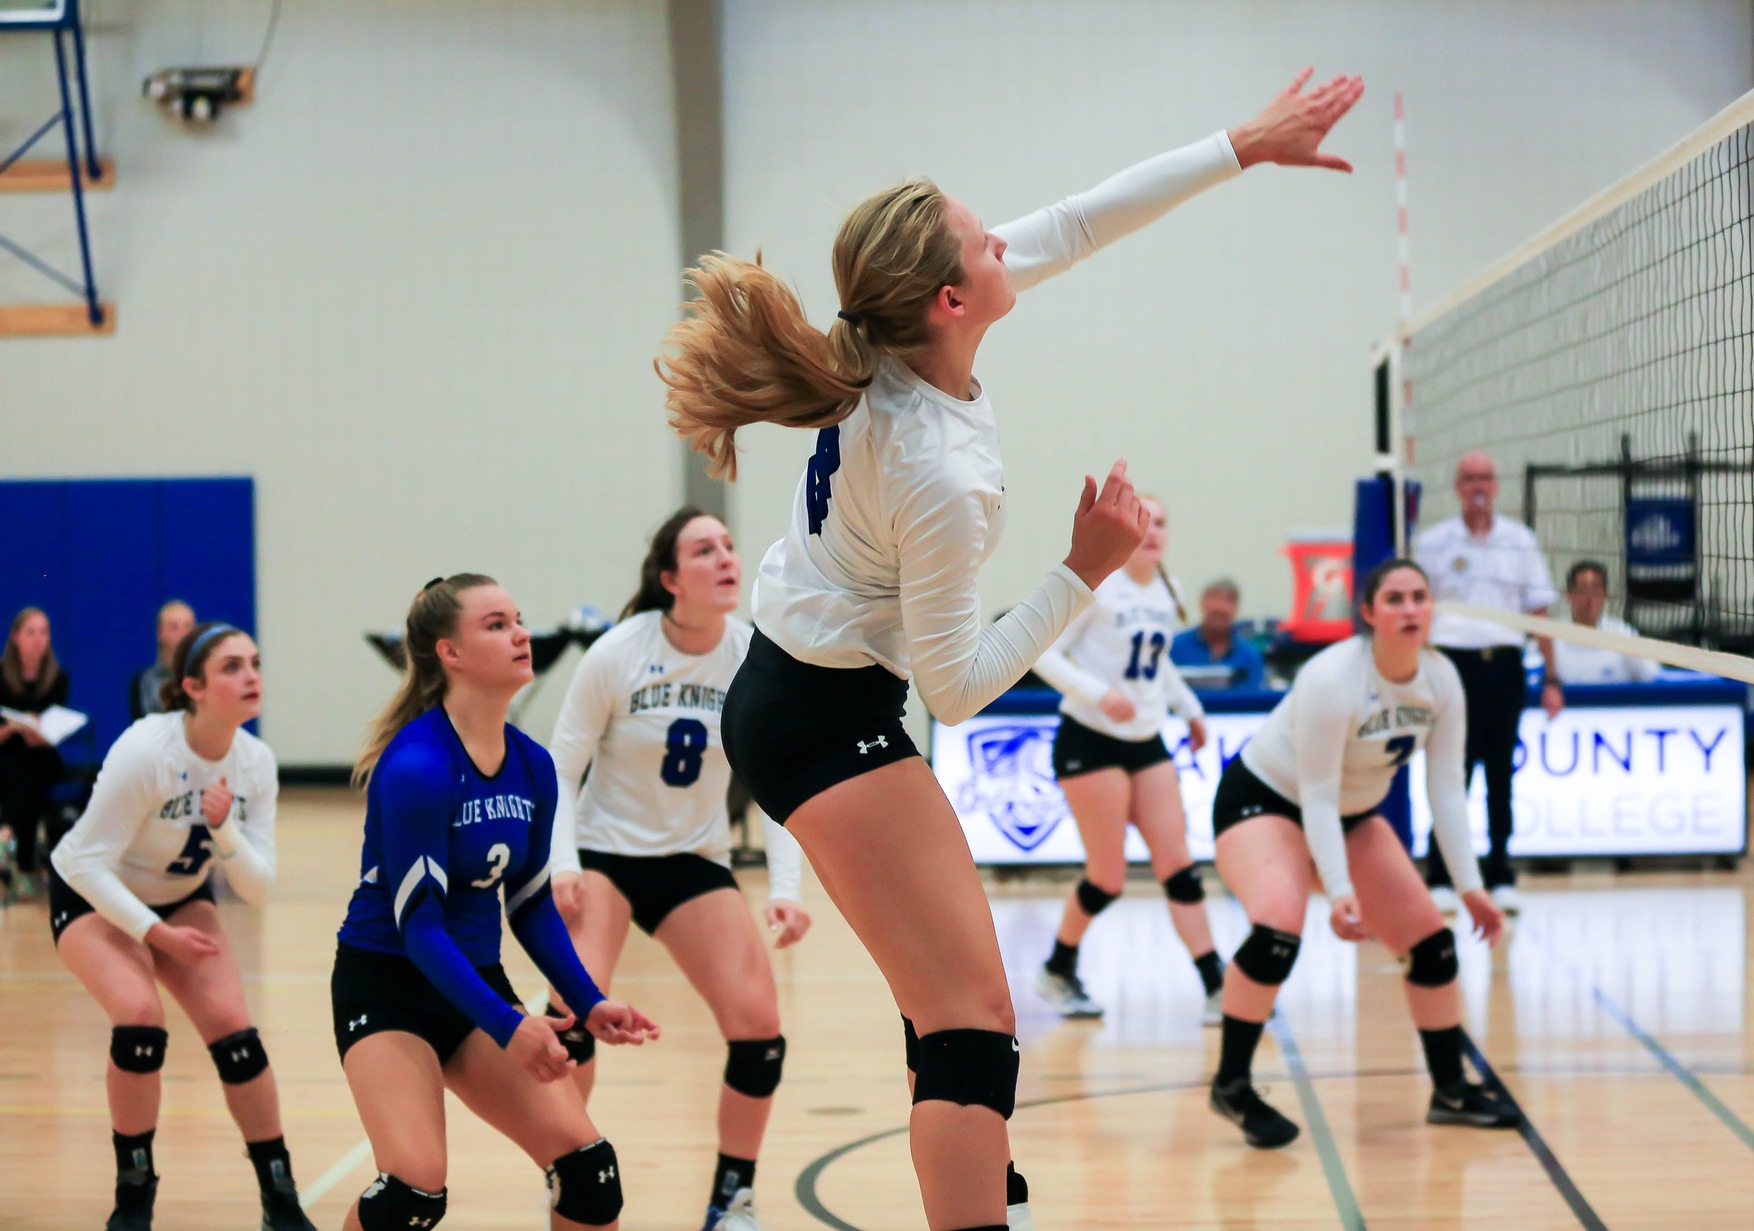 Blue Knights Volleyball Pick up 4 Wins this Weekend and Have 9 Match Win Streak